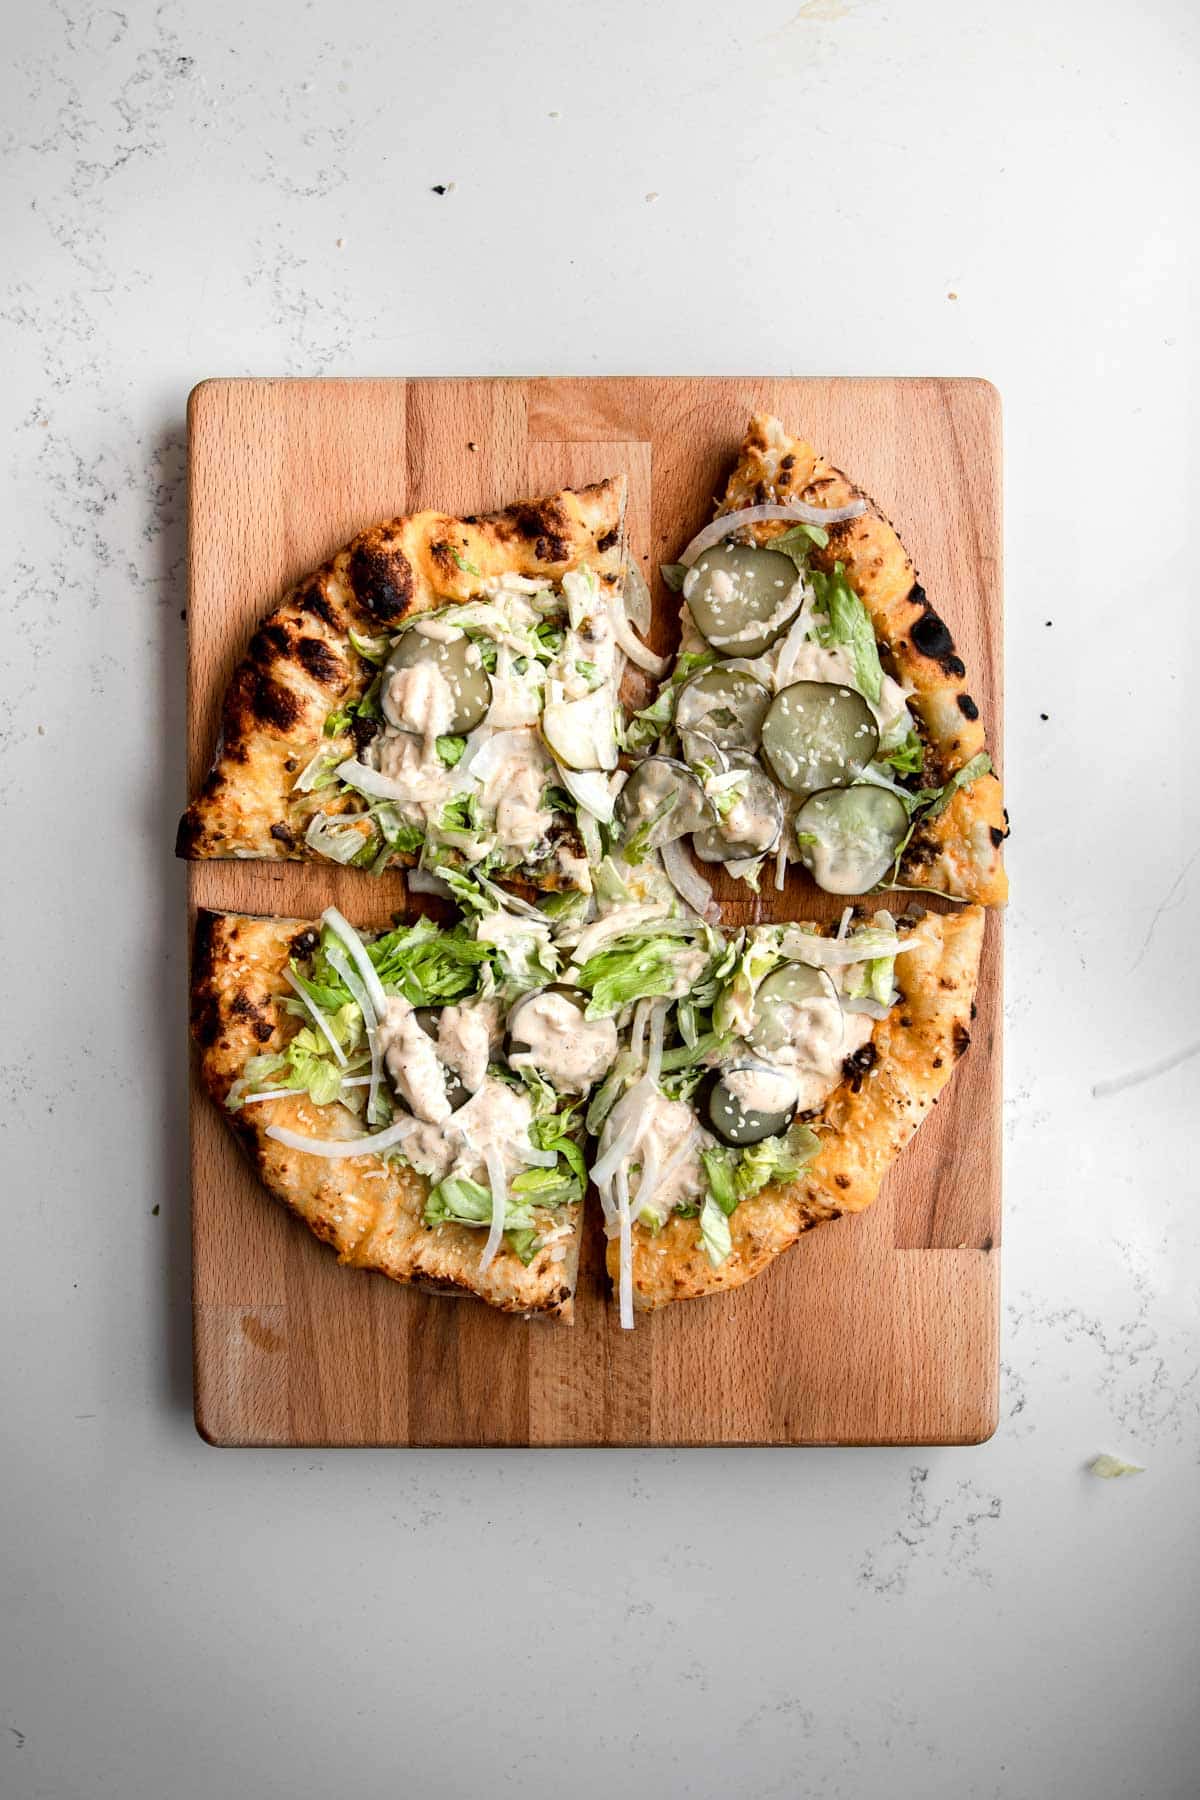 A Neapolitan-style big mac pizza cut into 4 slices with wood fired crust on a white plate topped with lettuce, pickles, onions and big mac sauce.